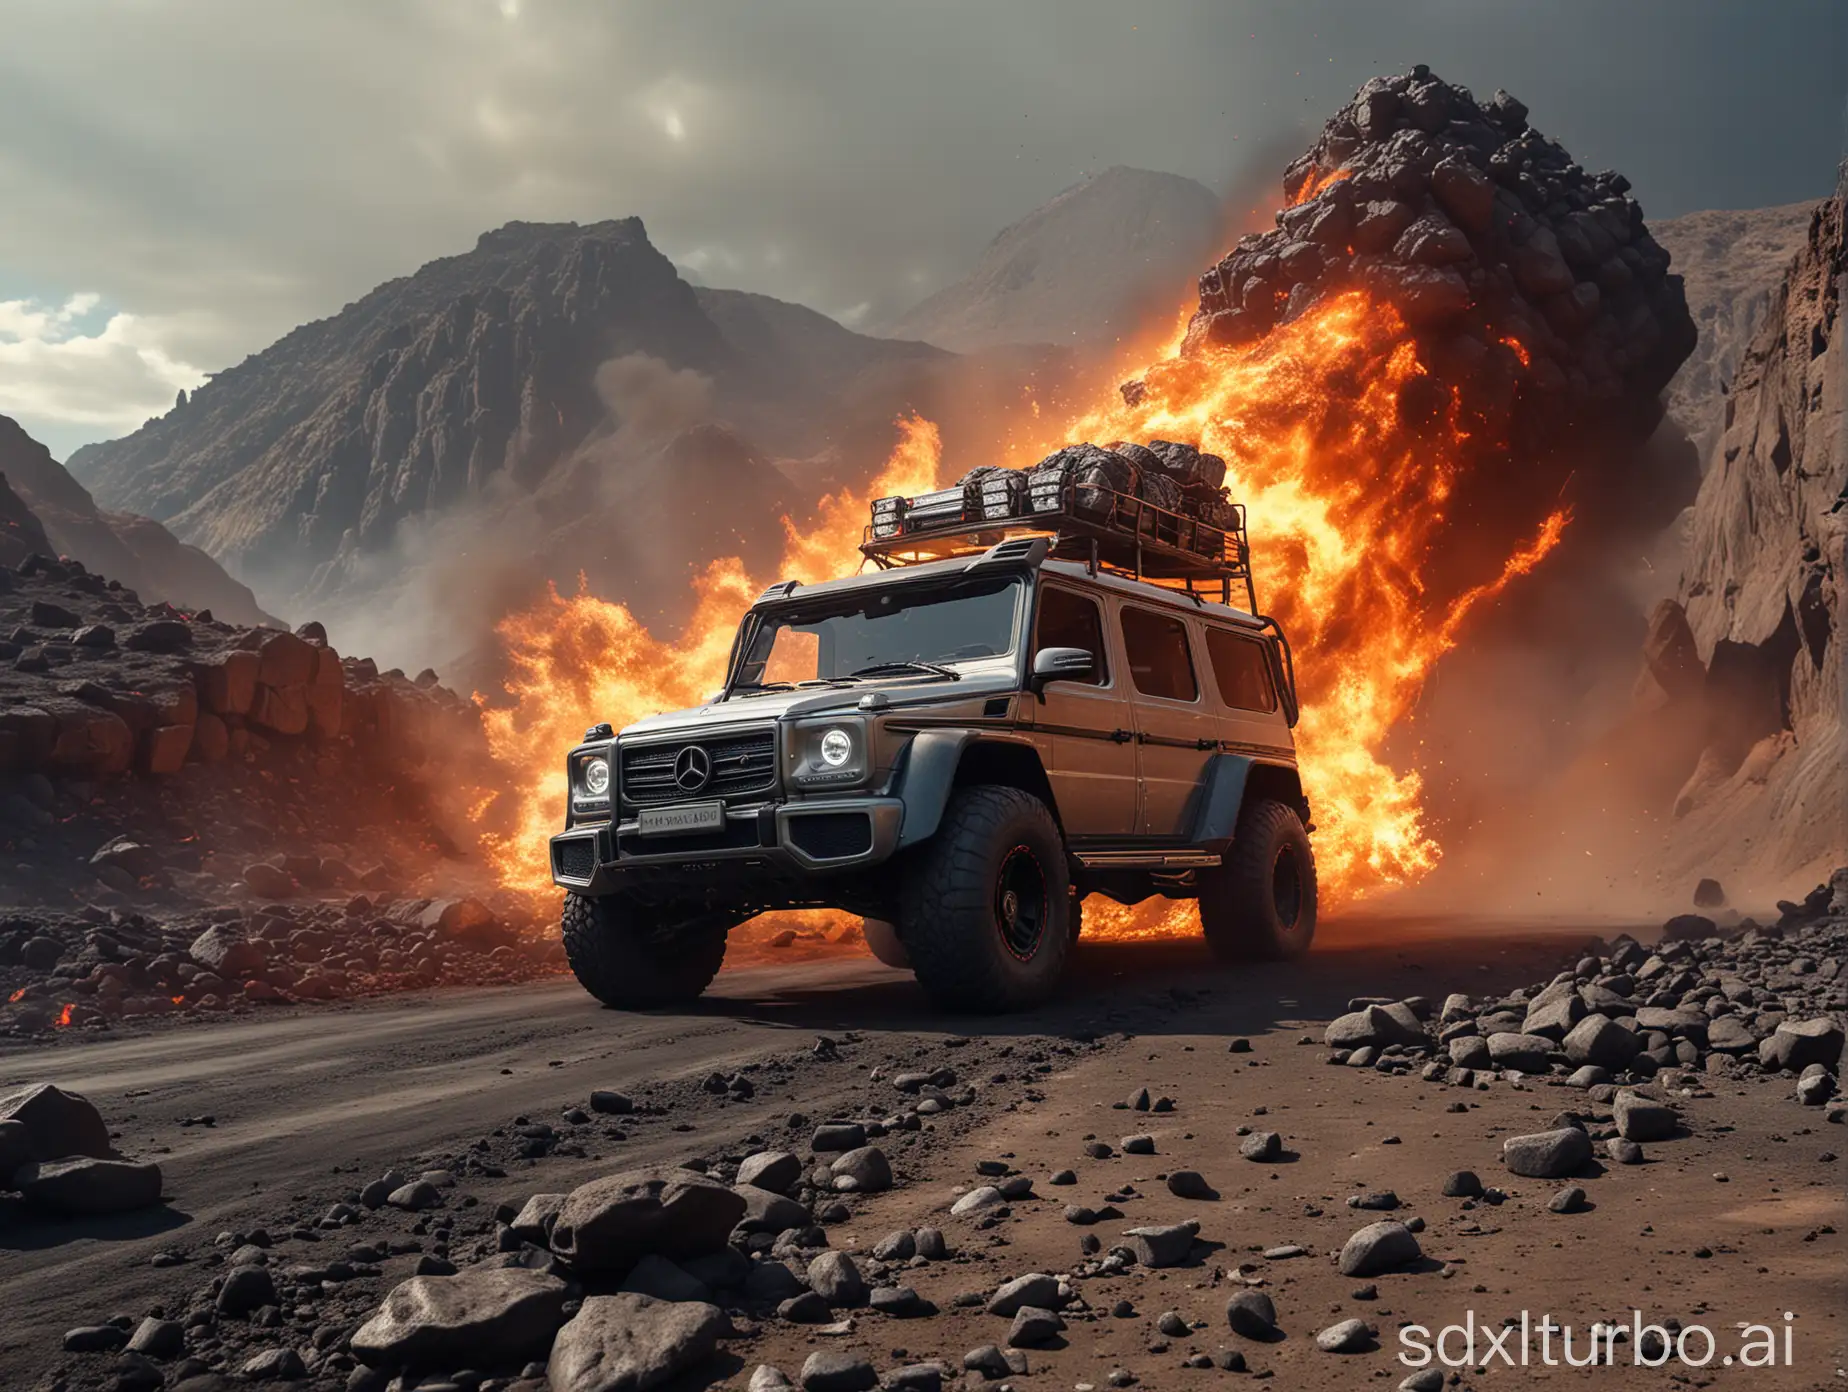 The 500-meter fire unicorn beast rushed out, and the magma chased the future Mercedes-Benz G. Referring to "Clash of the Titans", the future Mercedes-Benz G is speeding ahead, textured stones, cracks in the ground, lava spewing, tires spinning rapidly, low angle of view, sports atmosphere rendering, large scene, wide angle, Hollywood science fiction style